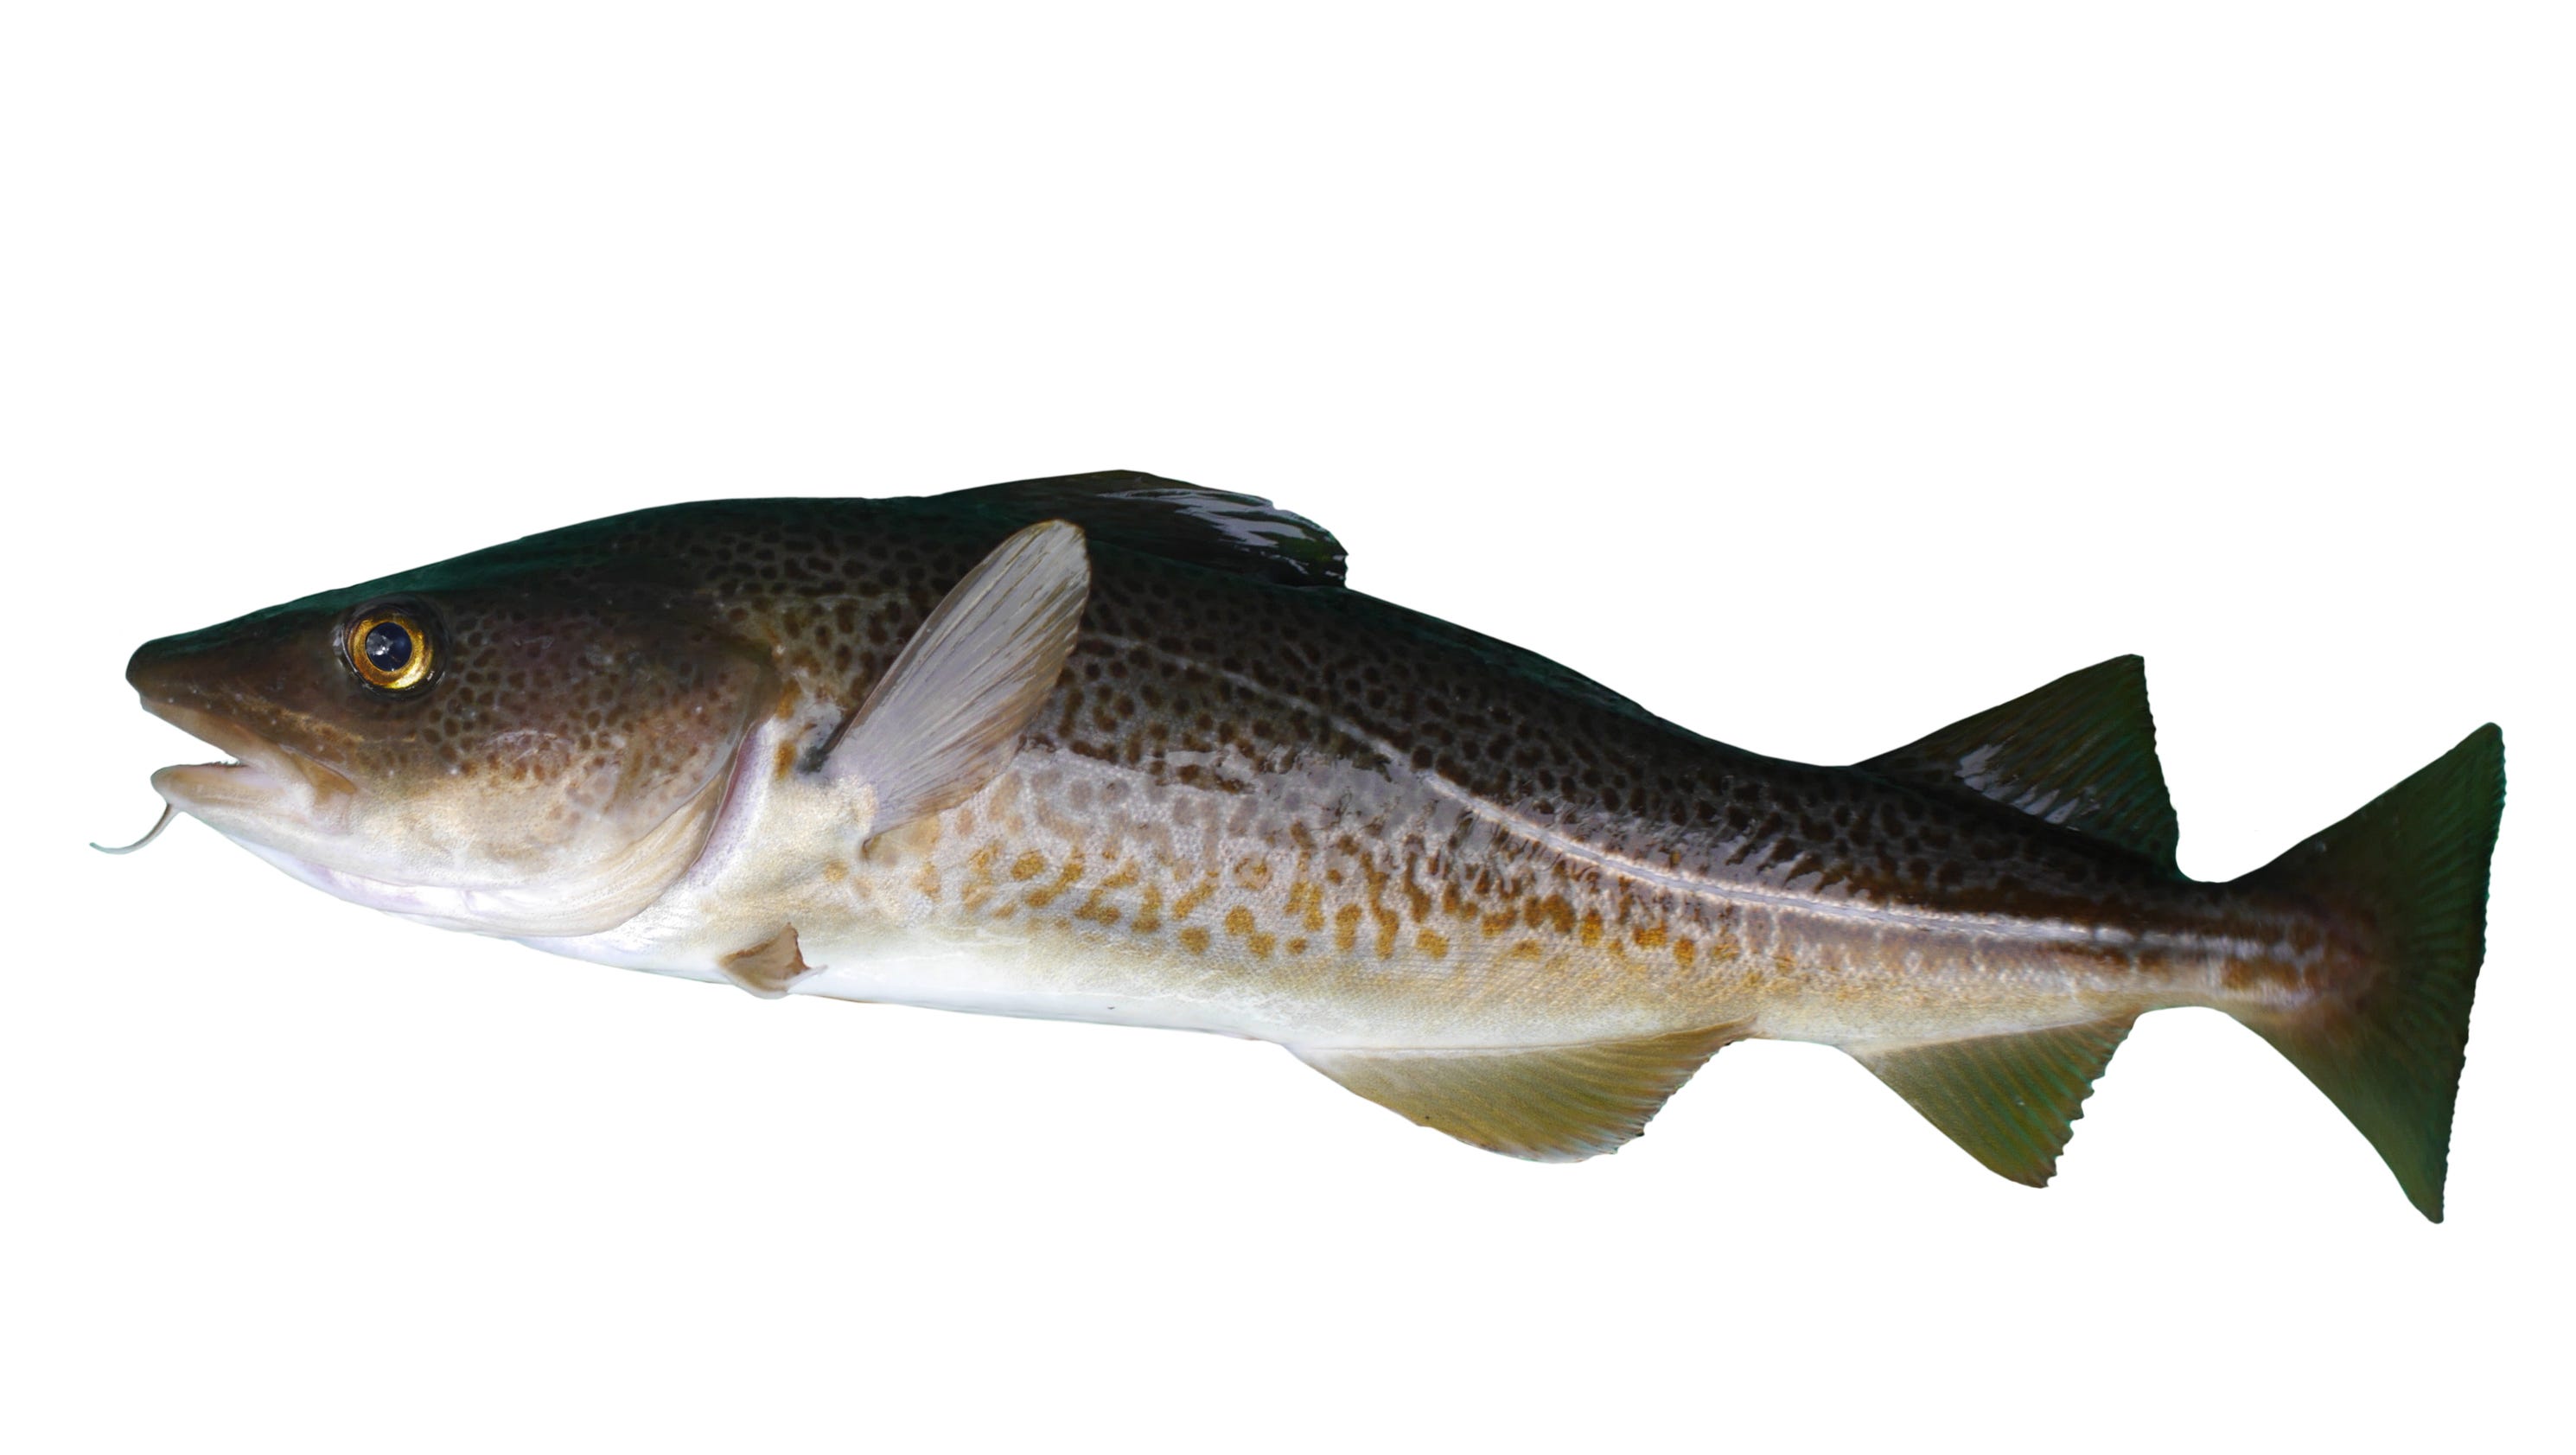 Can fish have regional accents? These cod do, scientists say